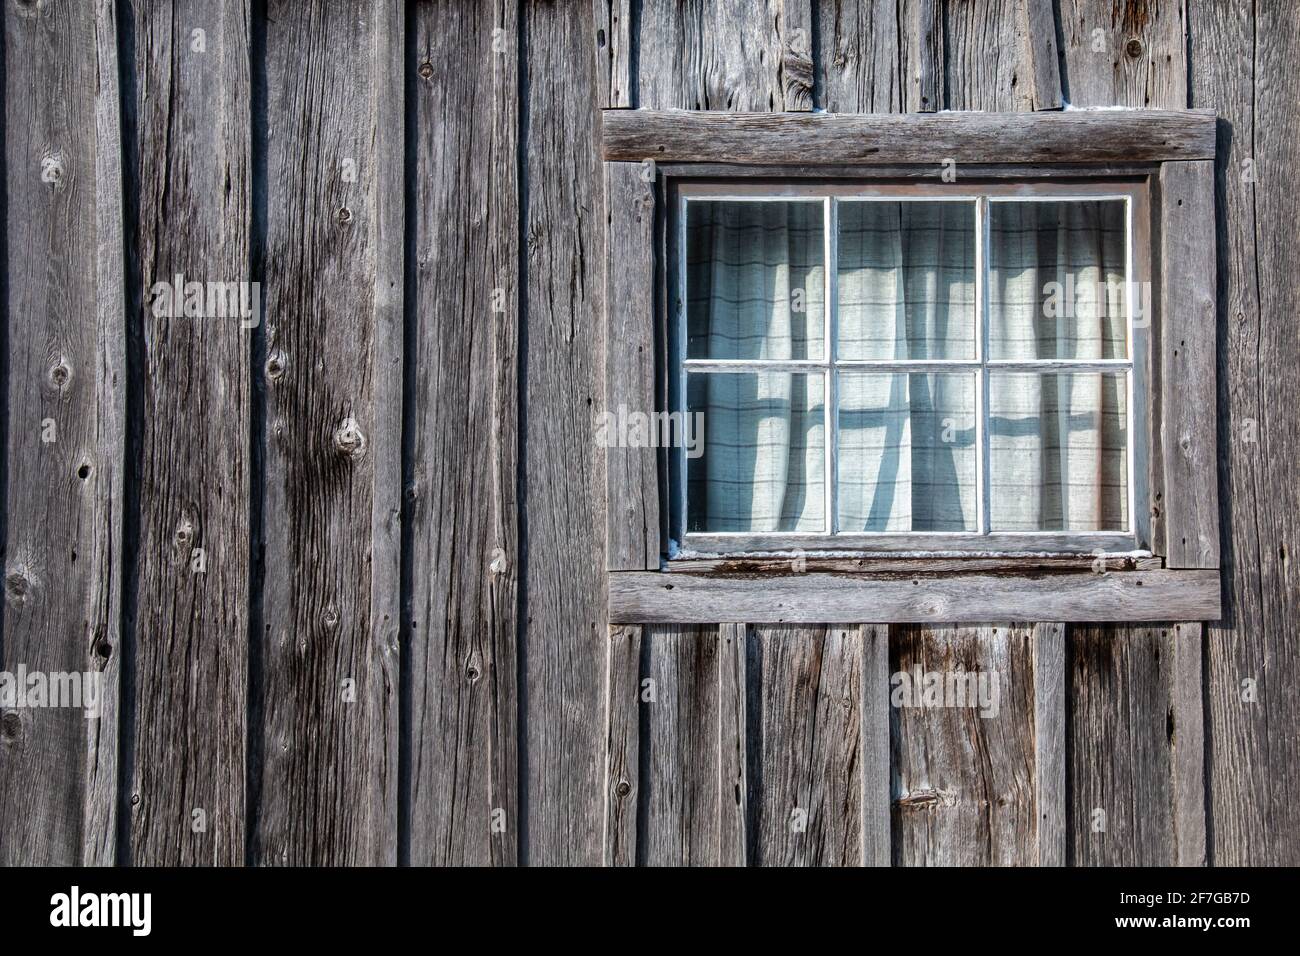 An old settler home in Lucan, Ontario, with worn wooden planks and a cute window with plaid curtains, photographed February 2021. Stock Photo